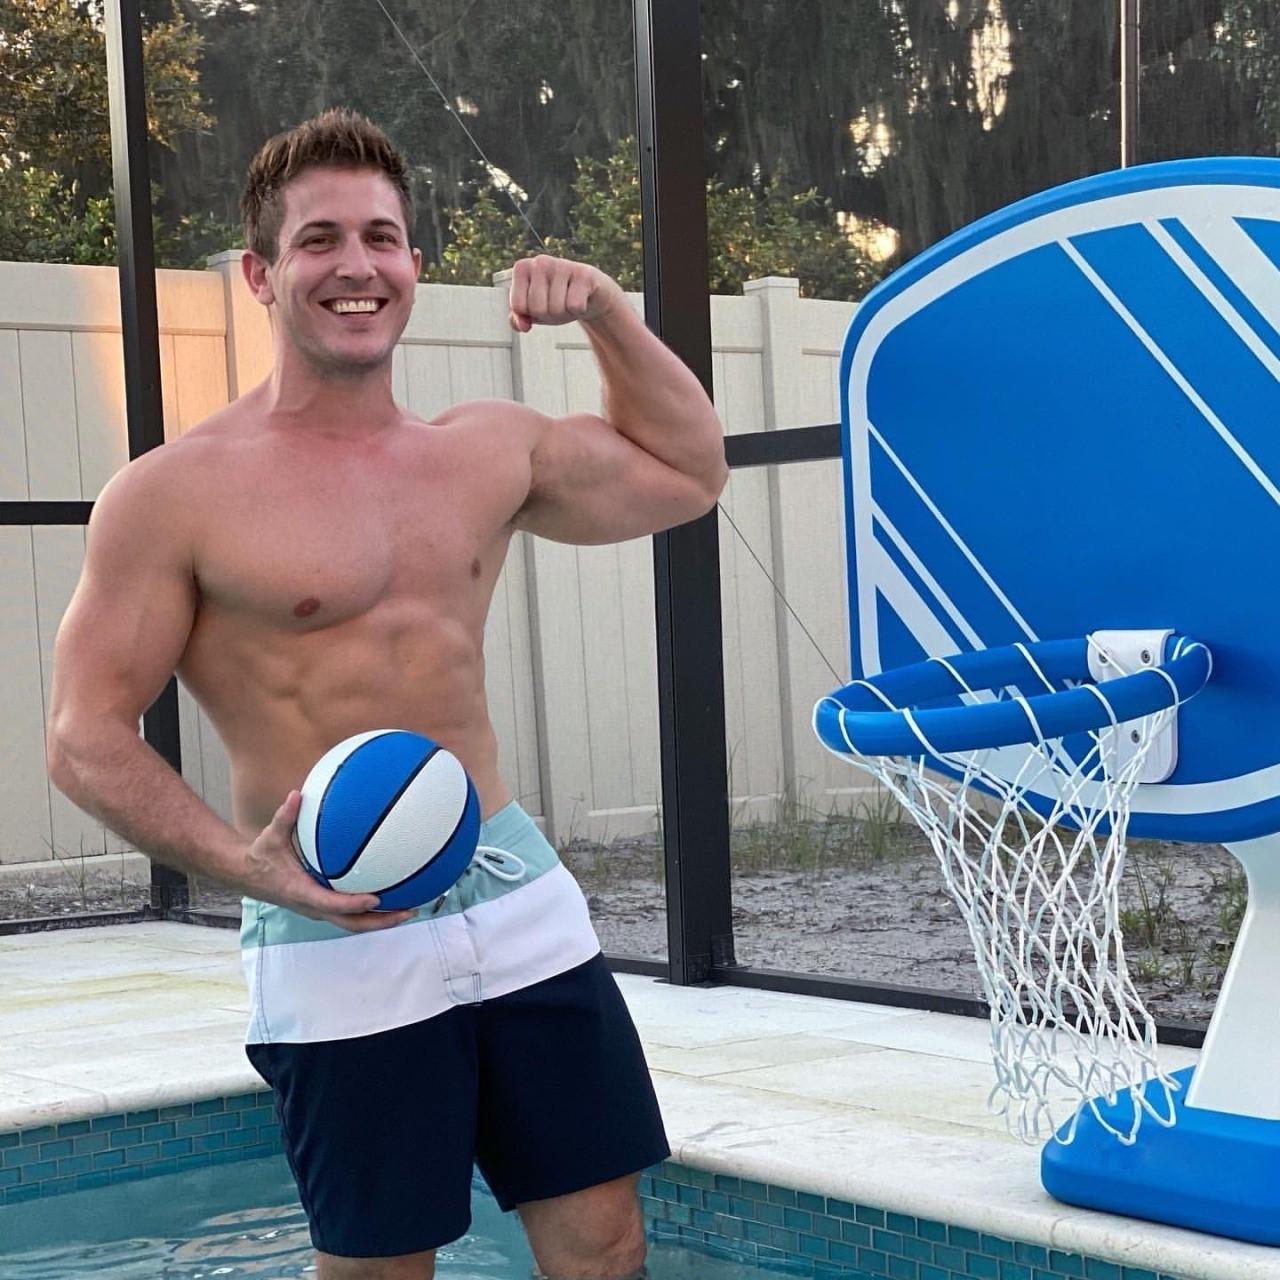 fit-handsome-shirtless-muscular-american-daddy-sexy-body-biceps-flex-pool-basketball-smiling-dilf